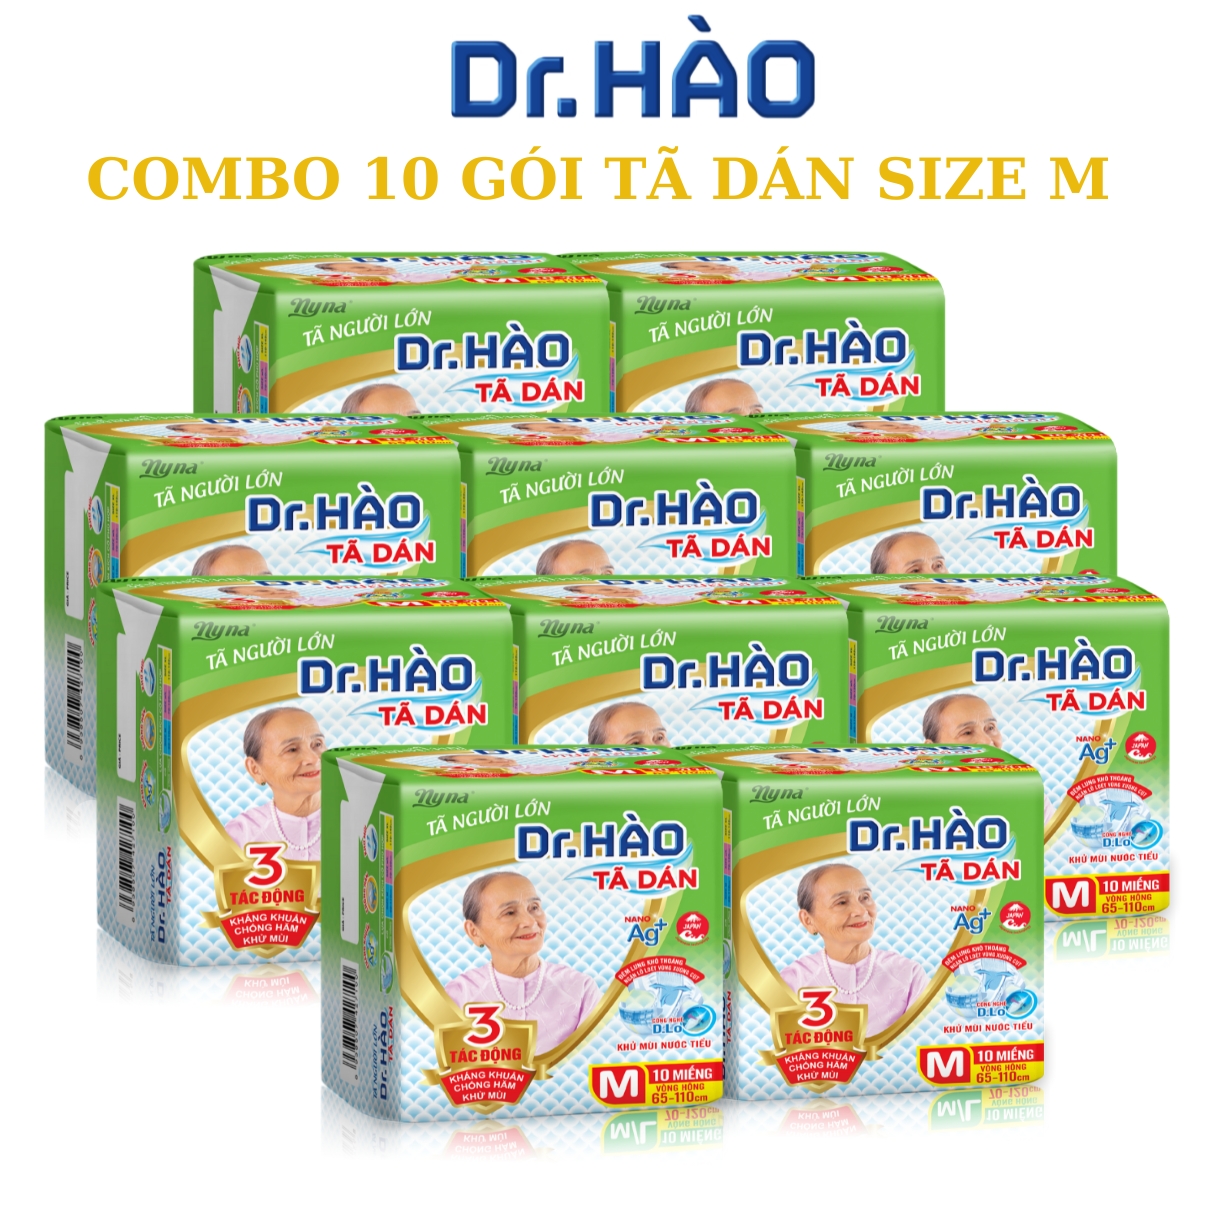 Intone D R.H Luy Dinh adult diapers m pack of 10 sheets combo 10 pack